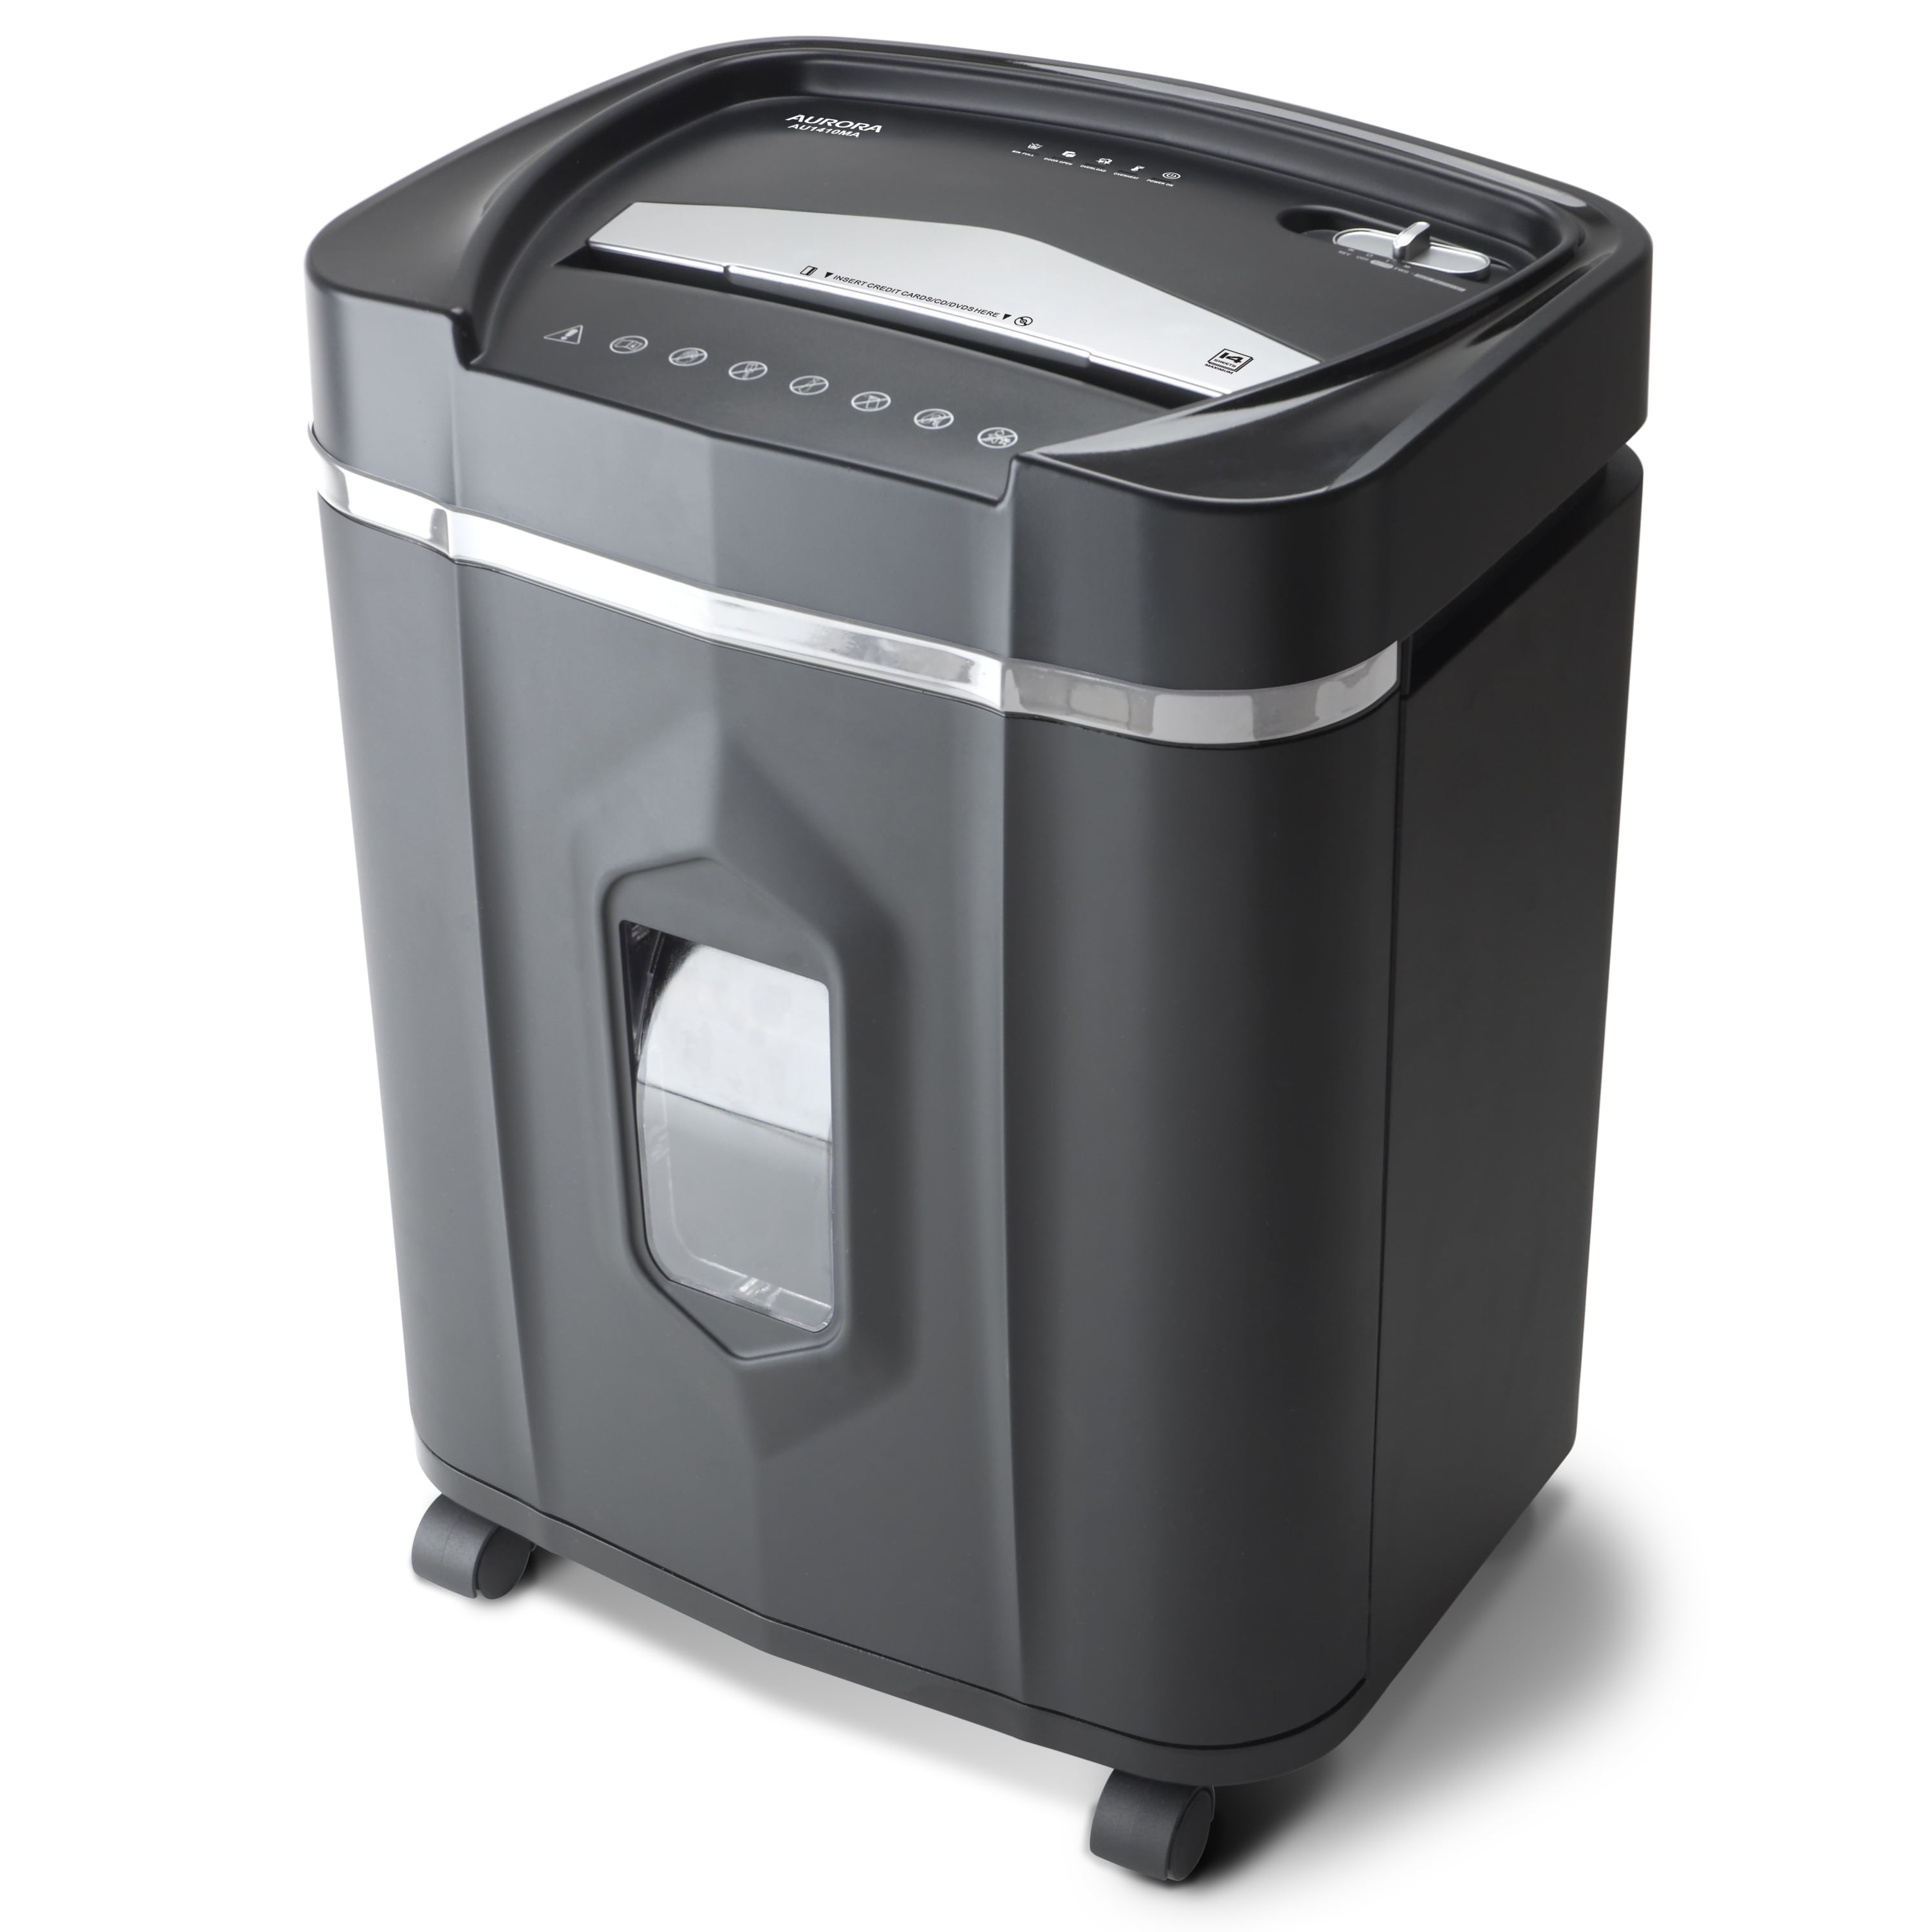   Basics 12 Sheet Cross Cut Paper and Credit Card Home  Office Shredder with 4.8 Gallon Bin, Black : Office Products